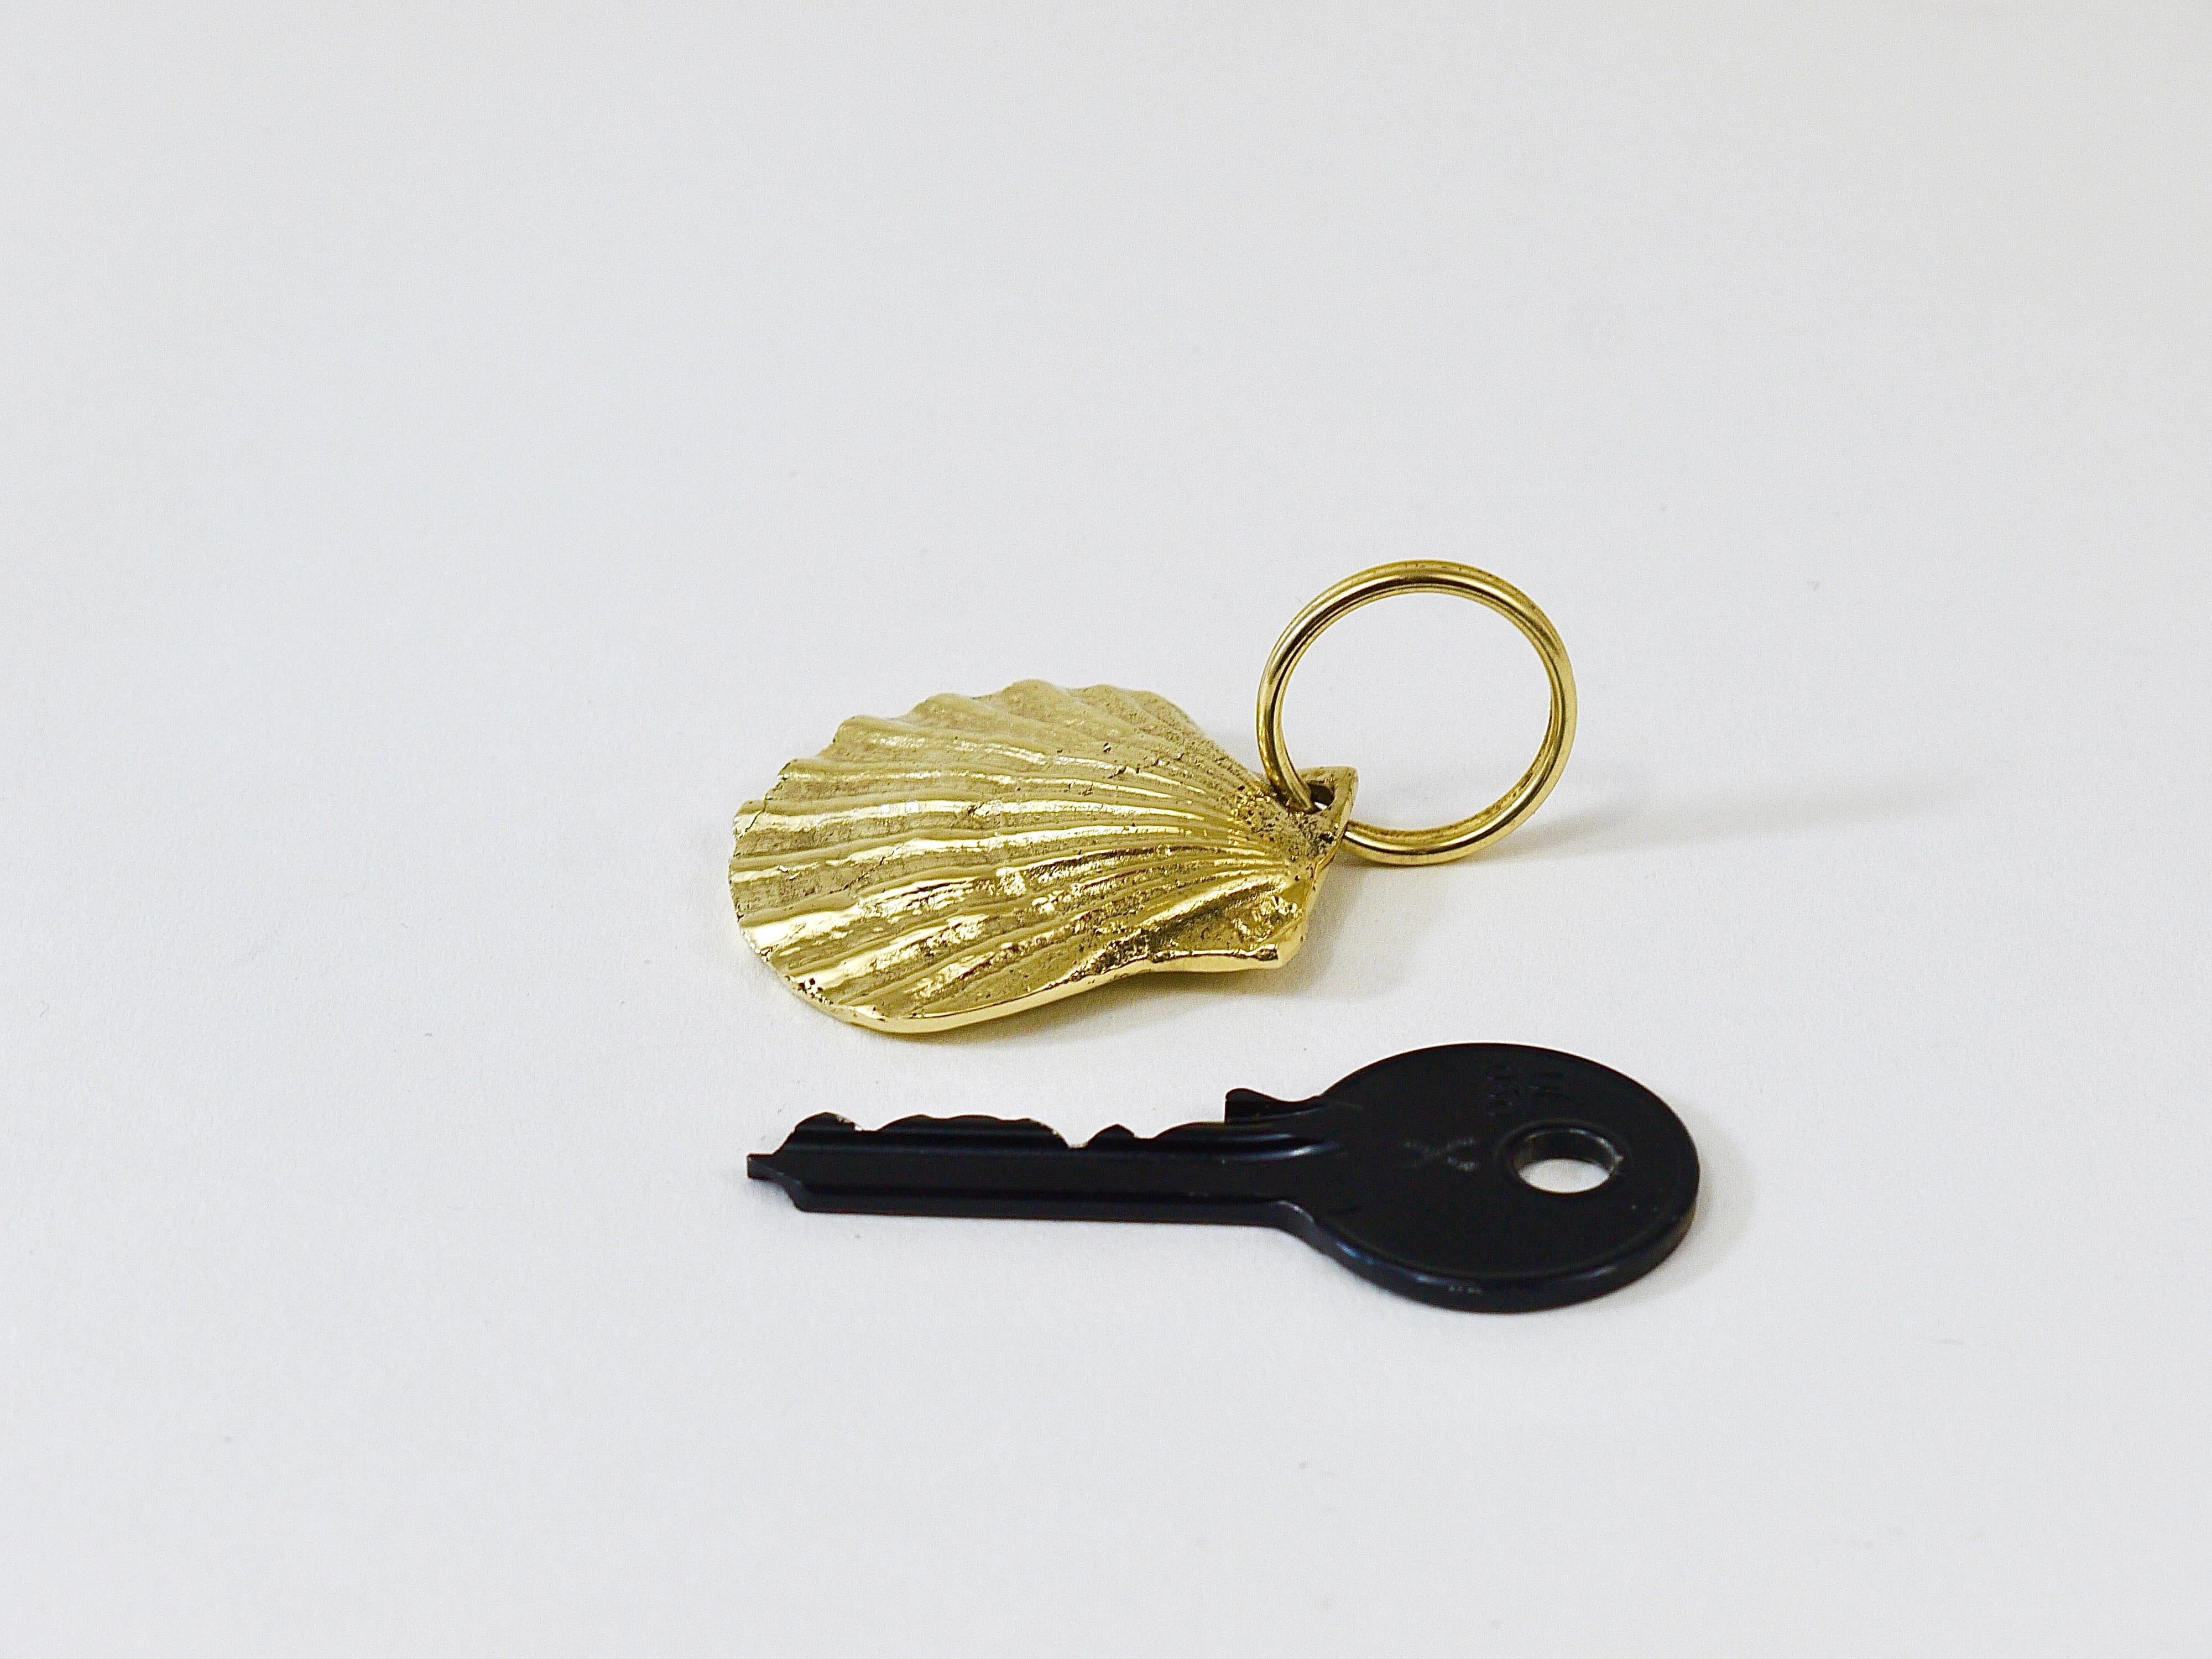 Mid-Century Modern Carl Auböck Handcrafted Midcentury Brass Shell Figurine Key Ring Chain Holder For Sale